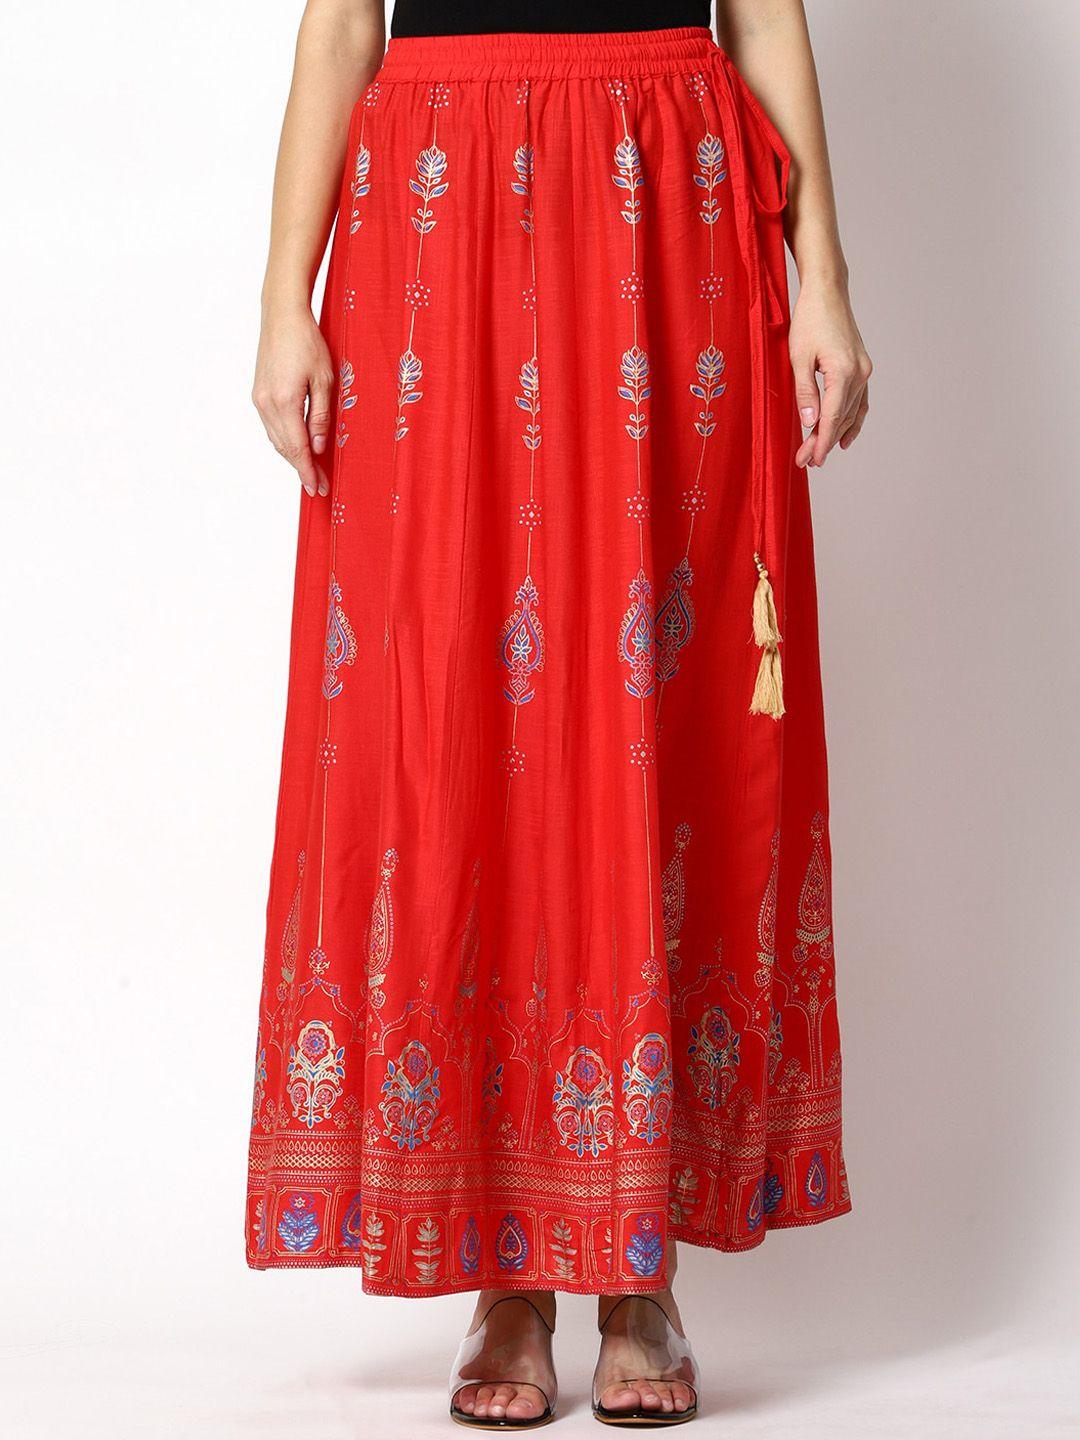 shereen women red ethnic printed maxi flared skirts